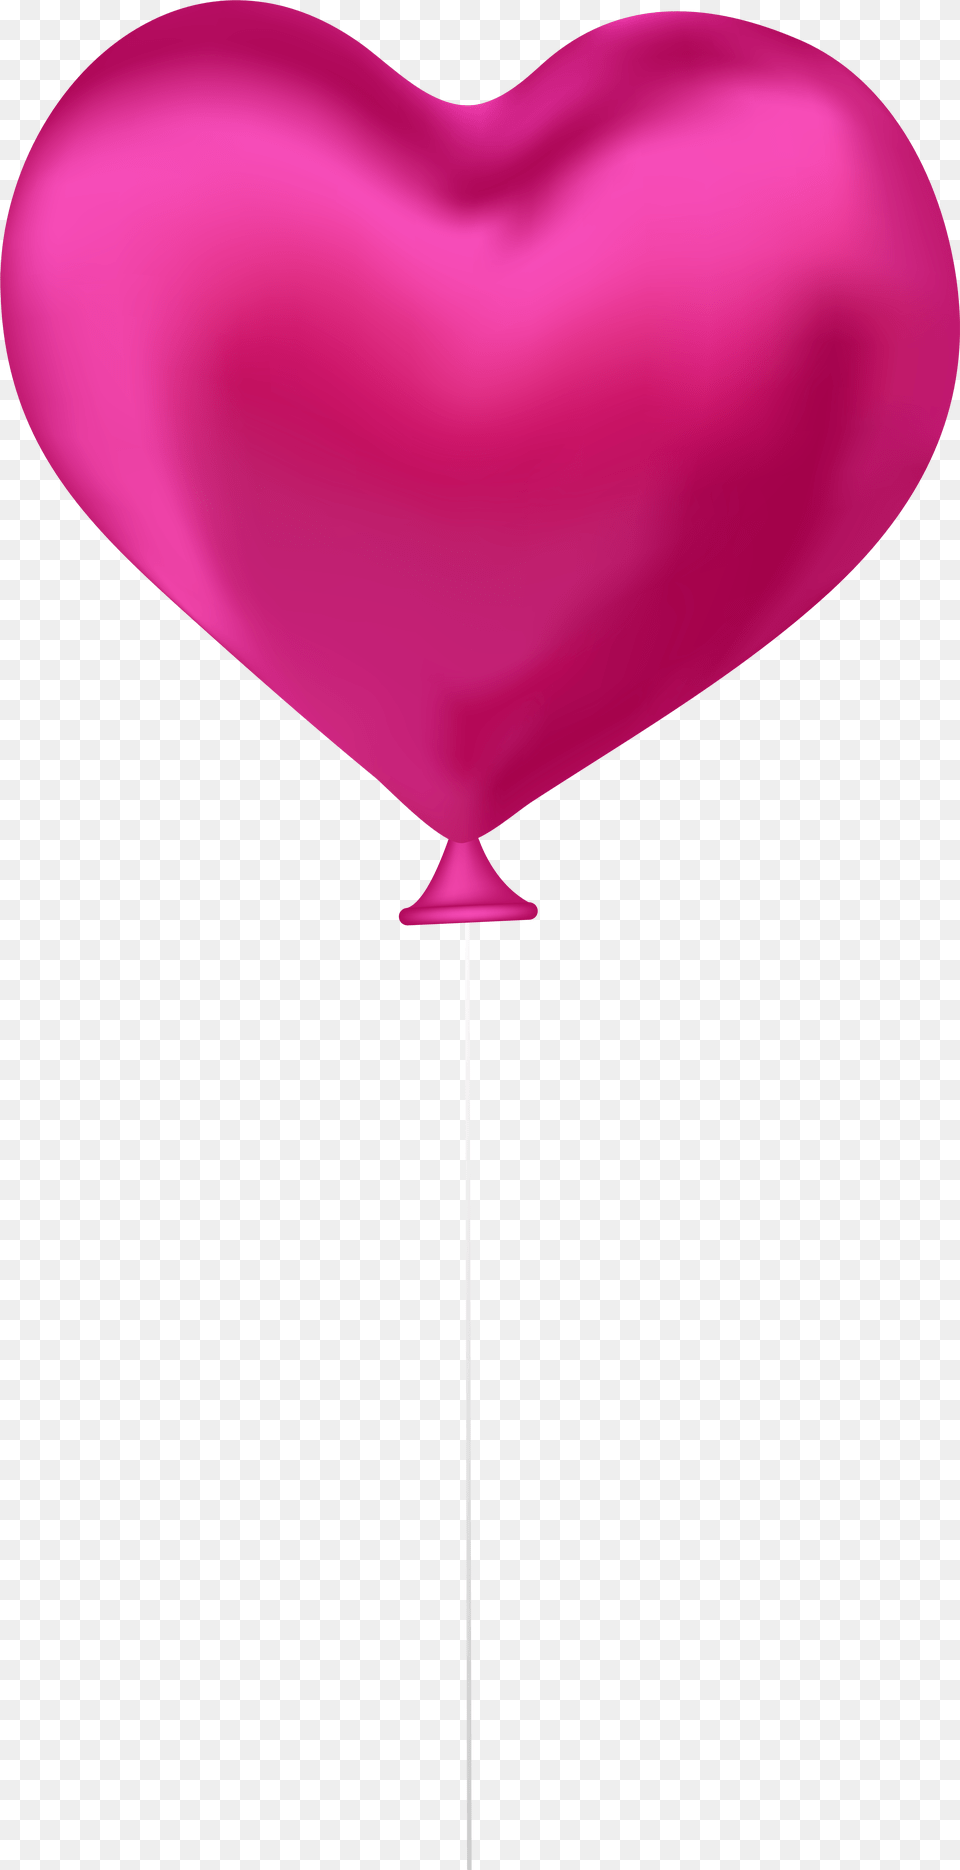 Library Of Pink Heart Graphic Black And Transparent Red Heart Balloon Free Png